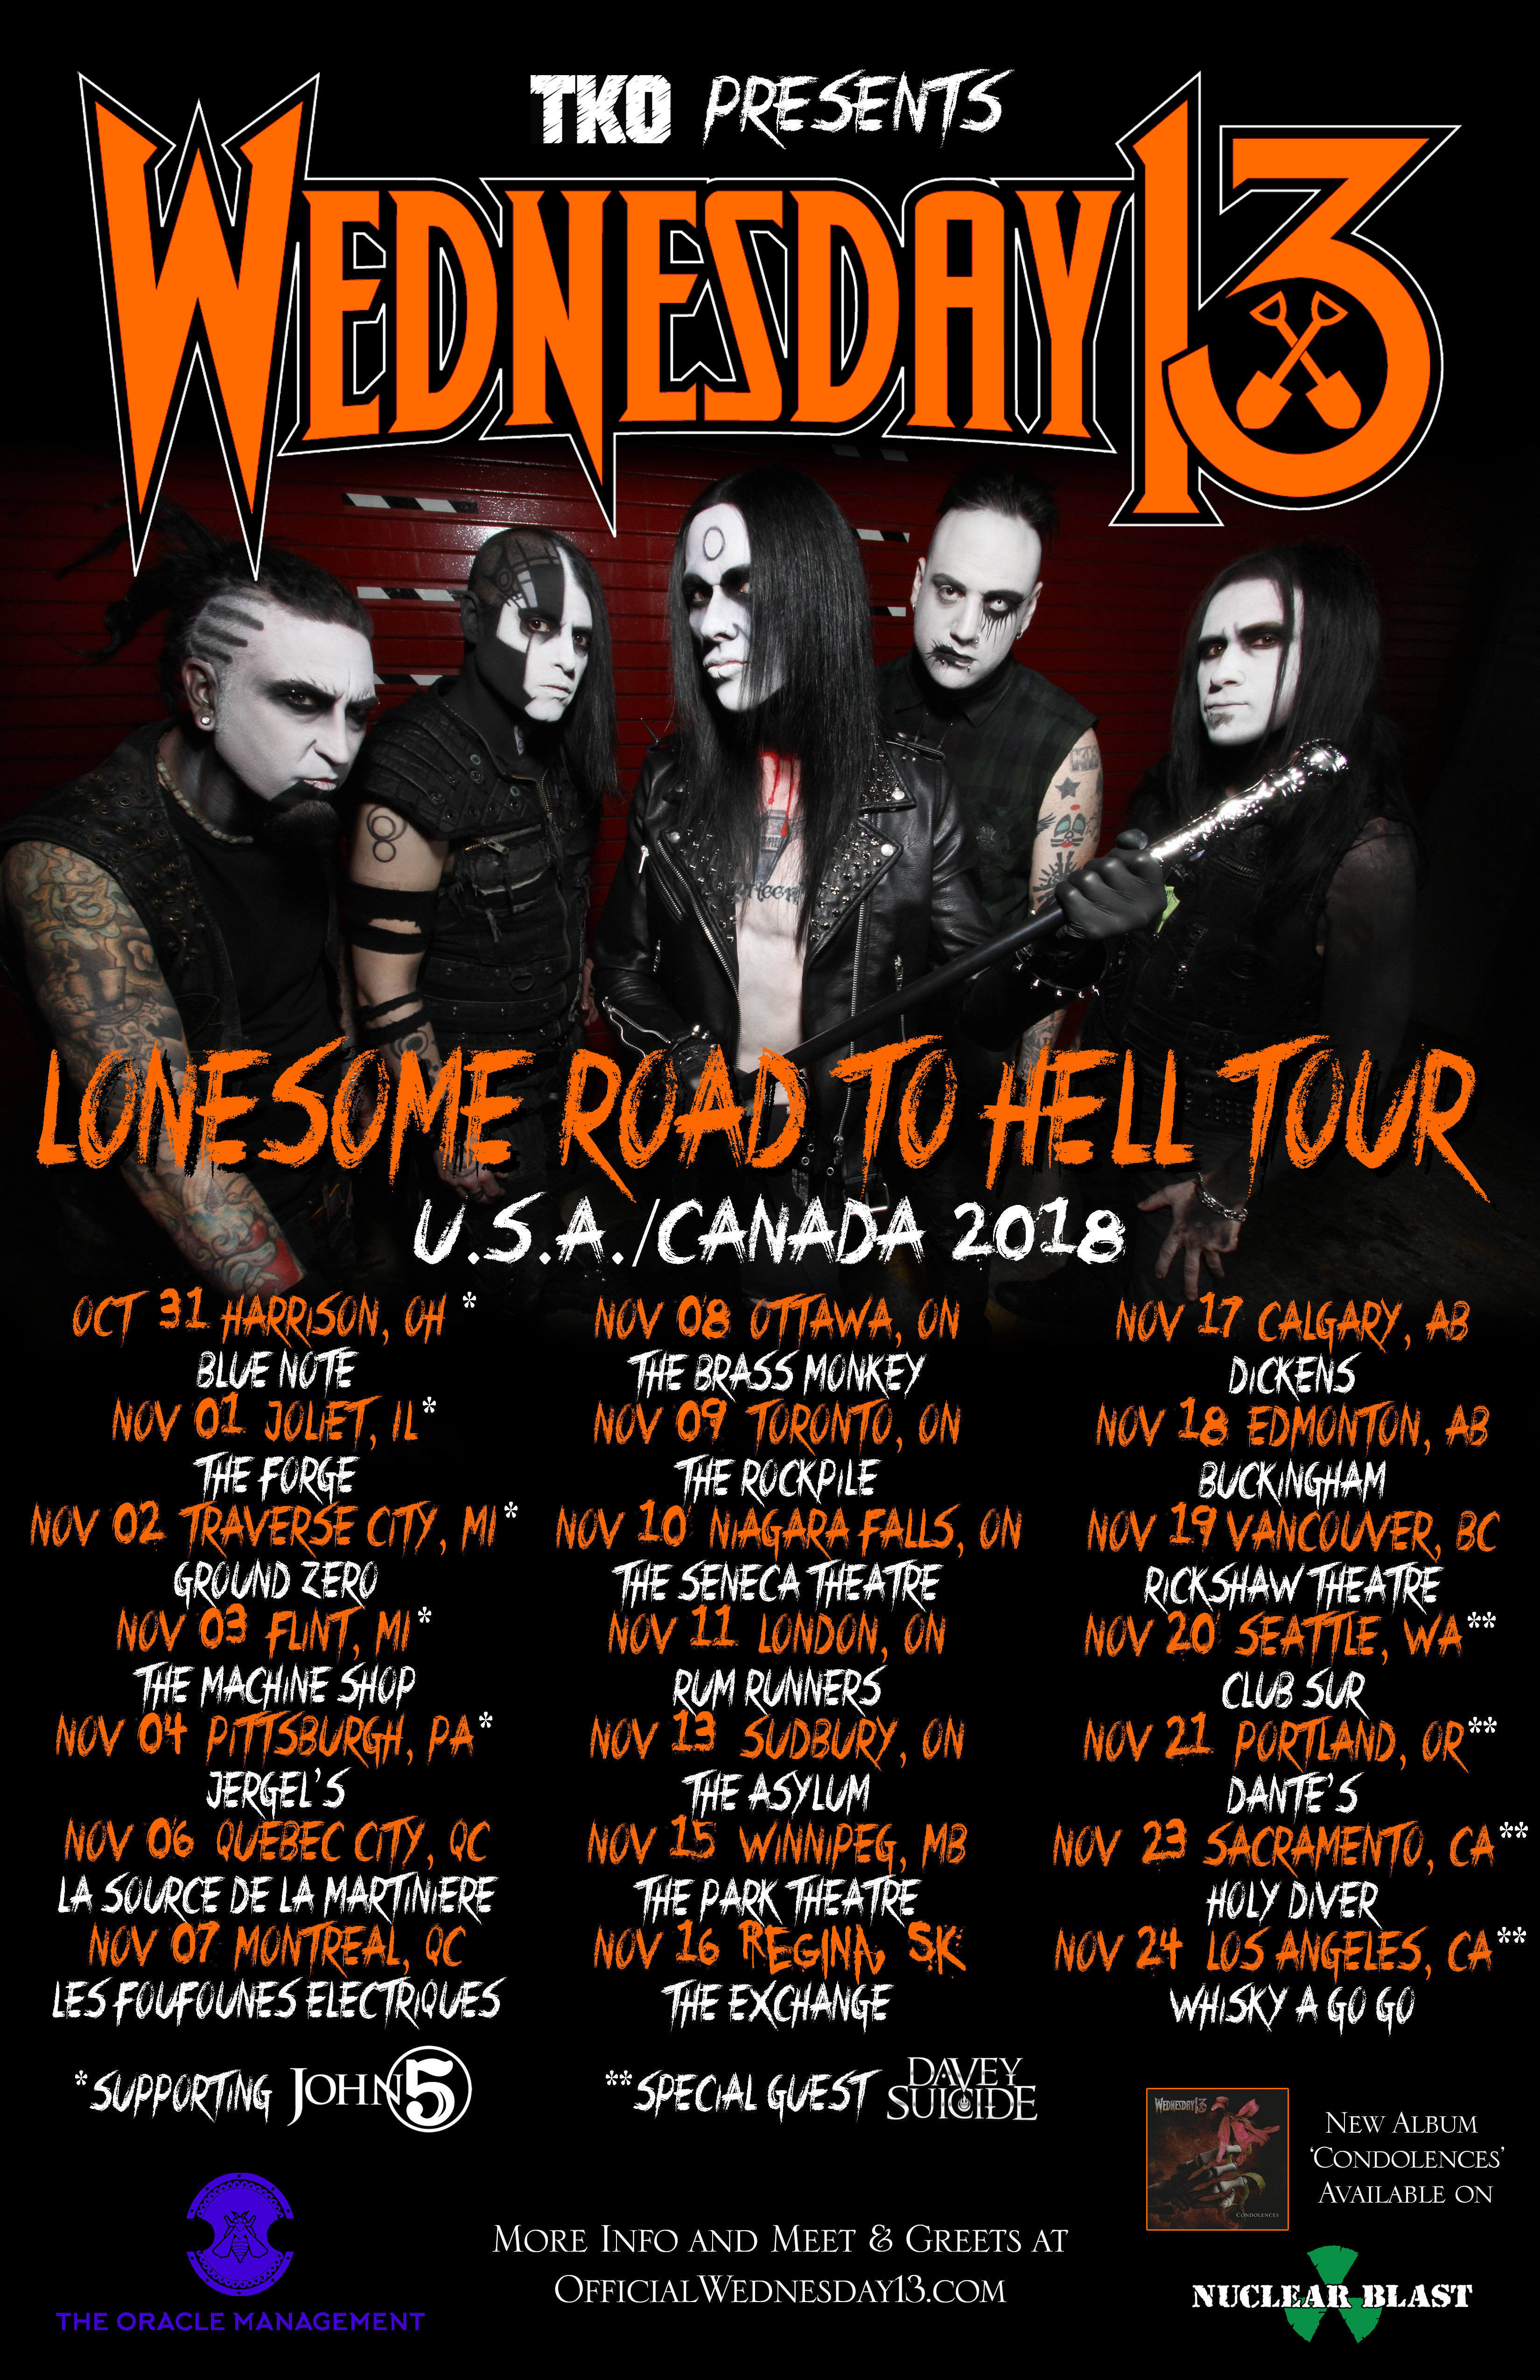 WEDNESDAY 13 announces North American tour dates